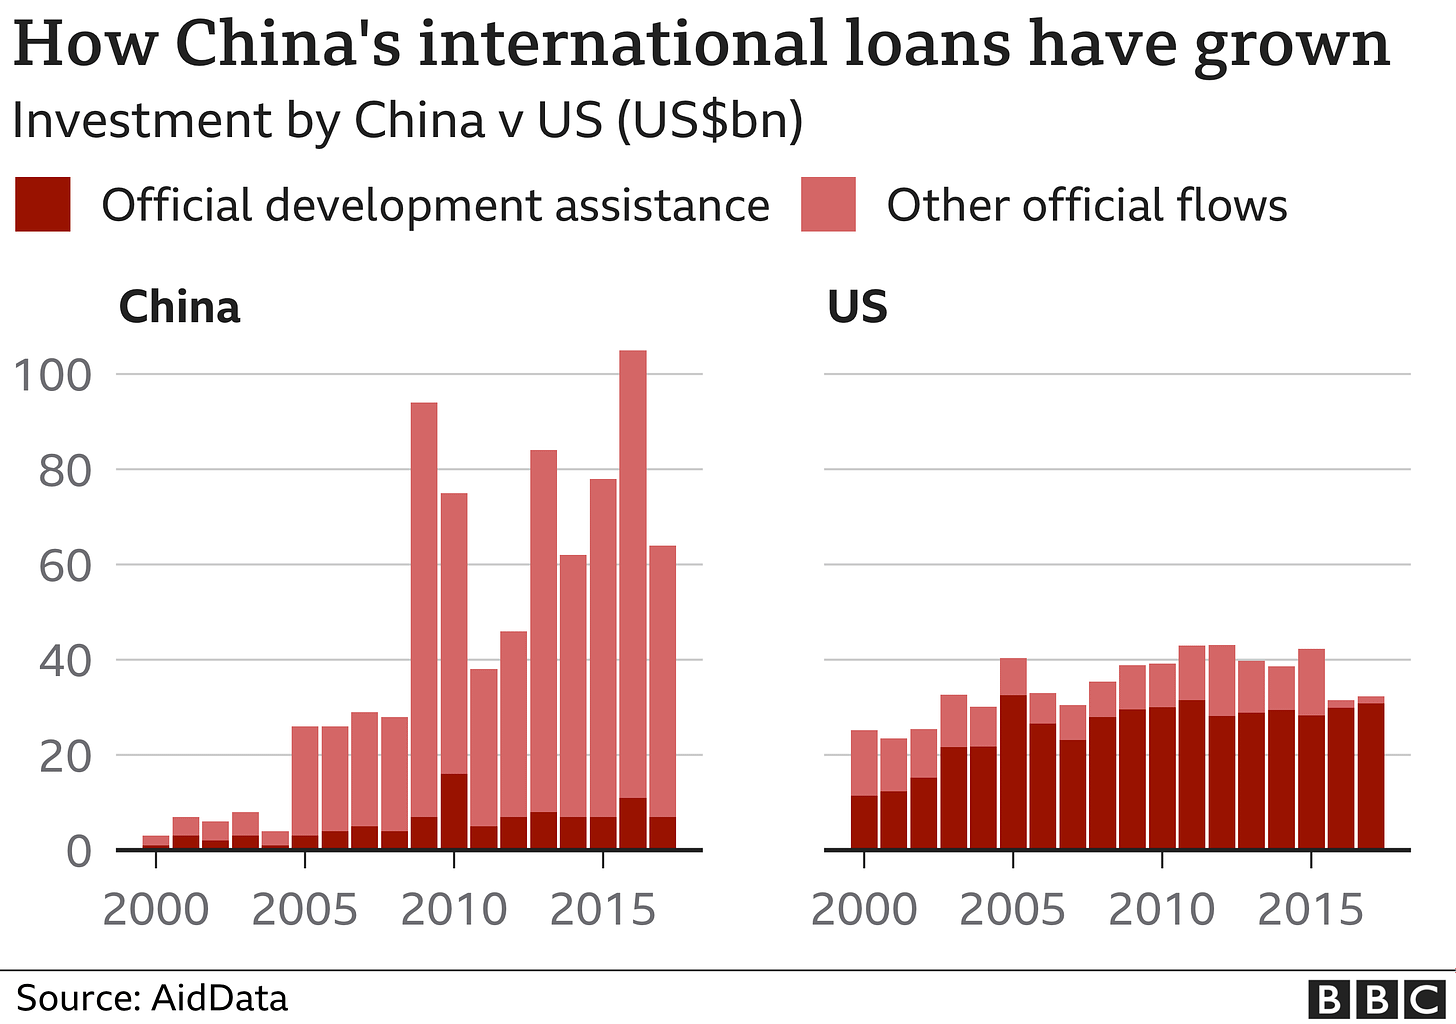 Chart showing how China's international loans have grown to exceed those of the US.